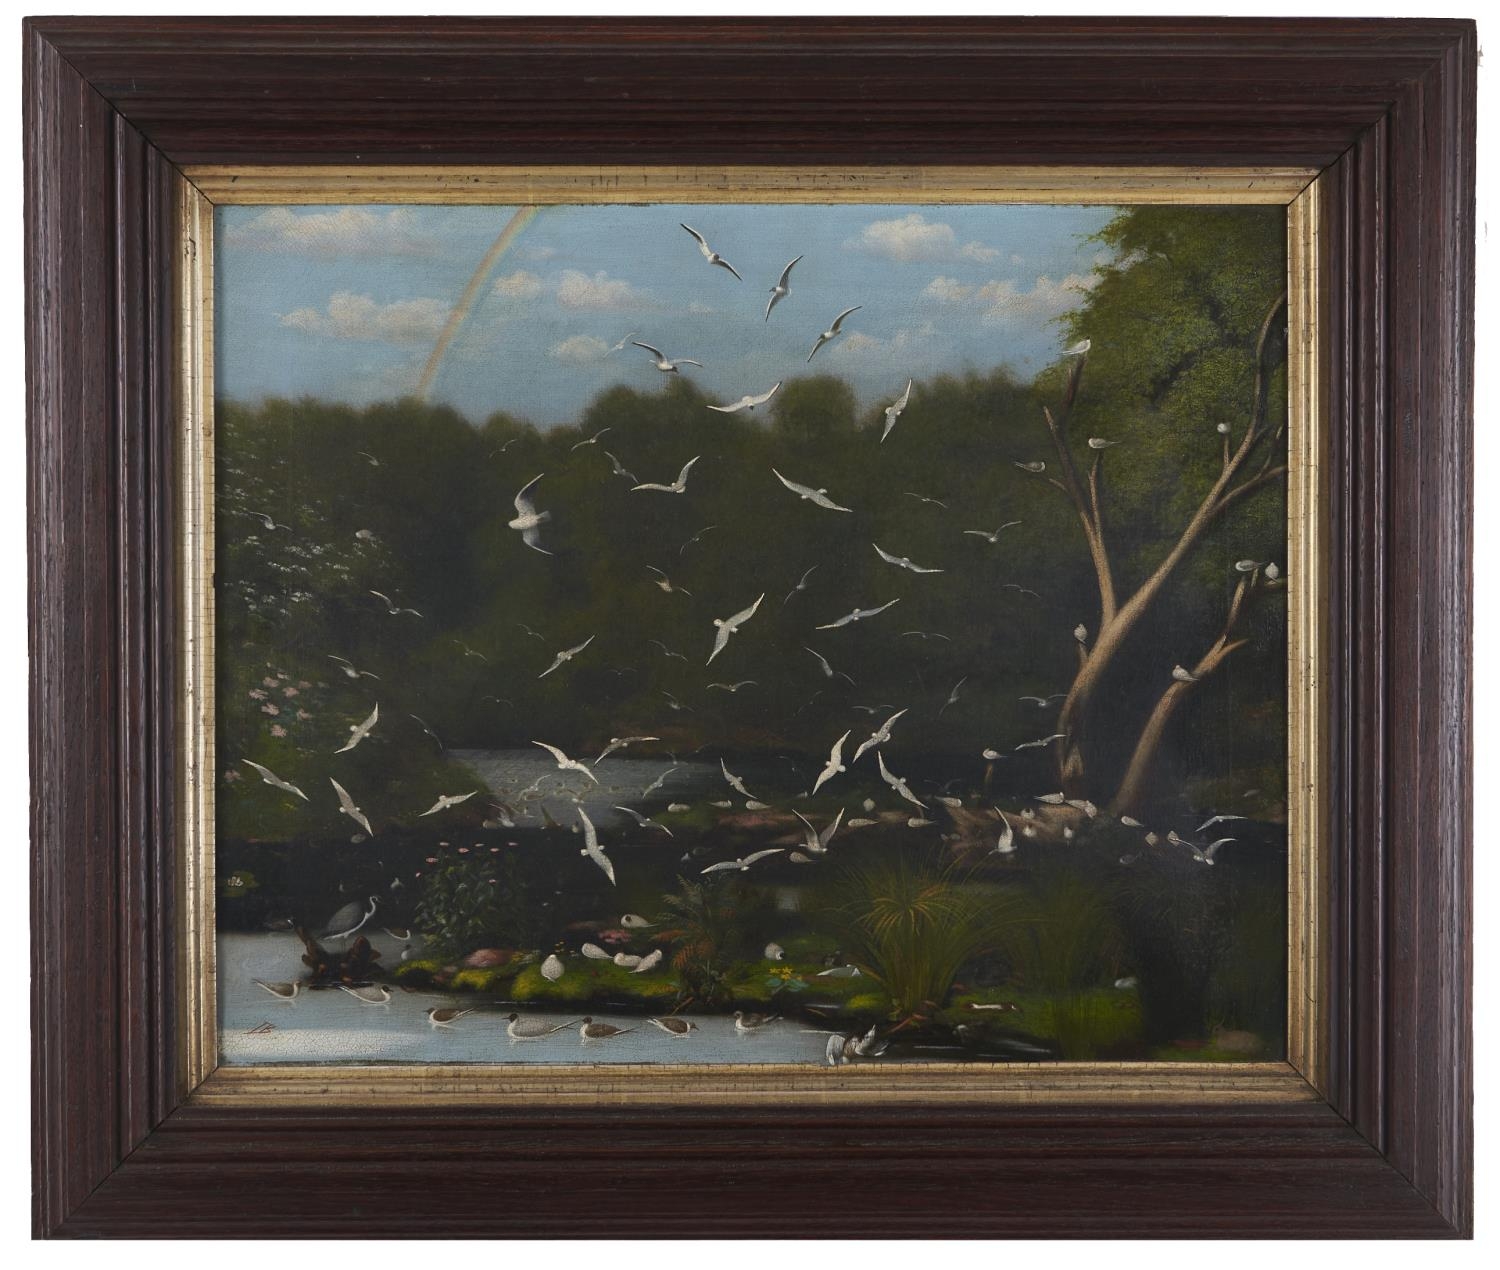 English Naive Artist, 19th / early 20th century - Birds Returning to Roost over a Mill Pond at - Image 2 of 3